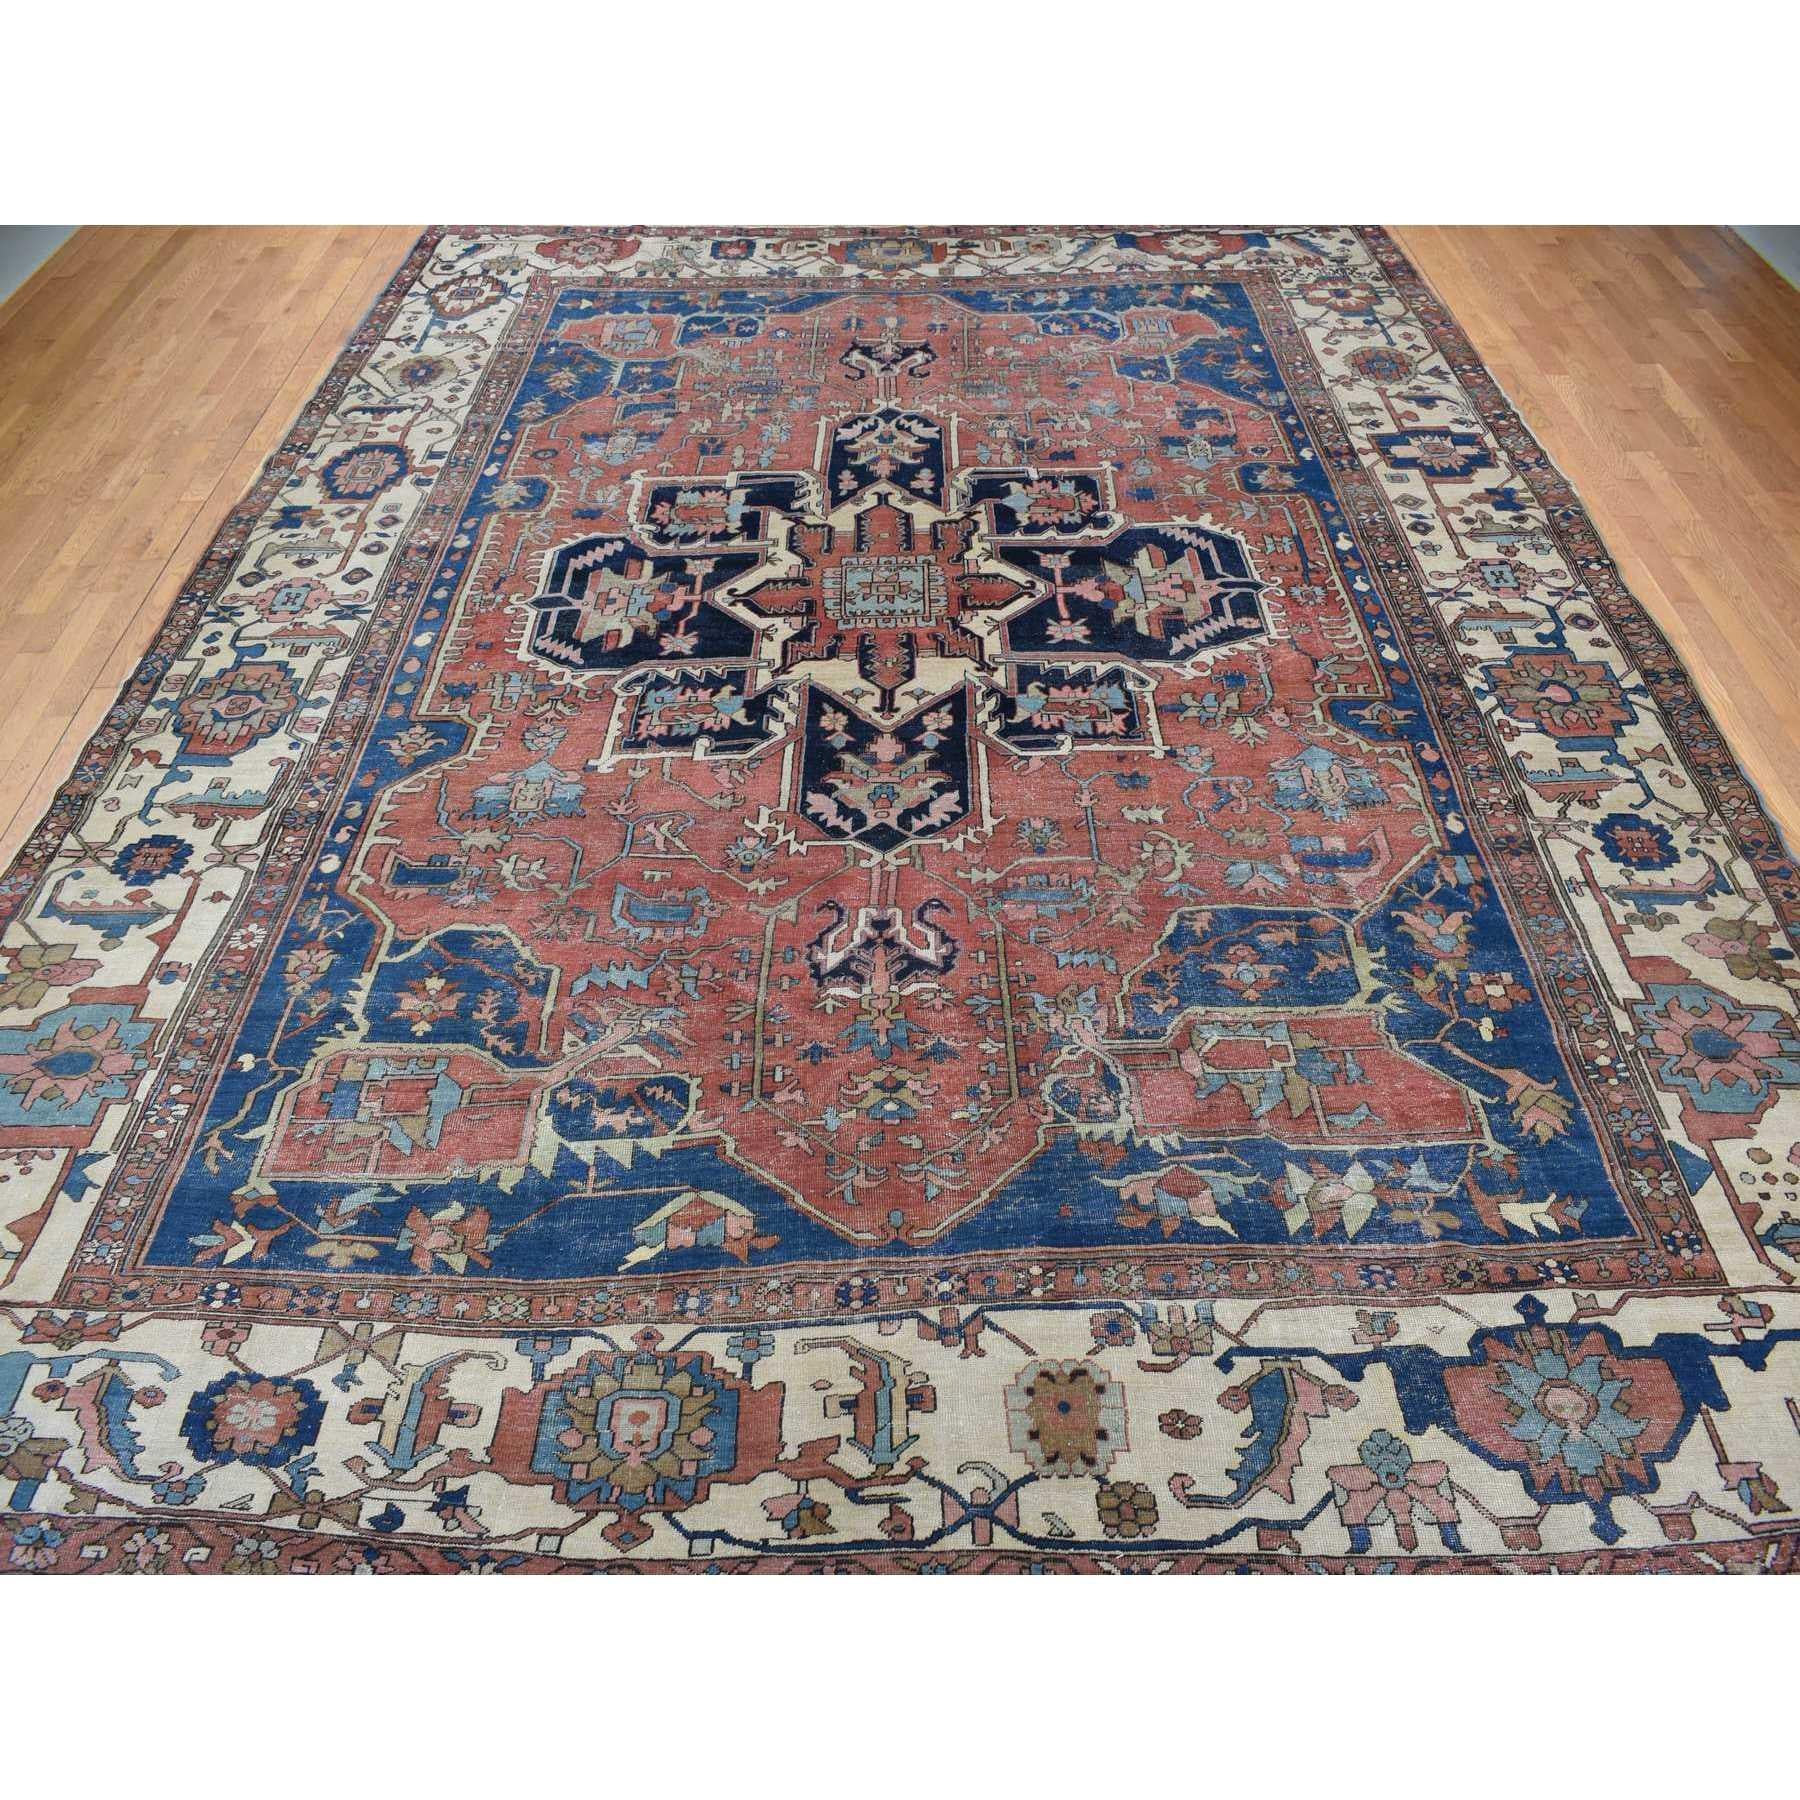 Medieval Red Antique Persian Serapi Heriz Wool Hand Knotted Even Wear Rug 11'3